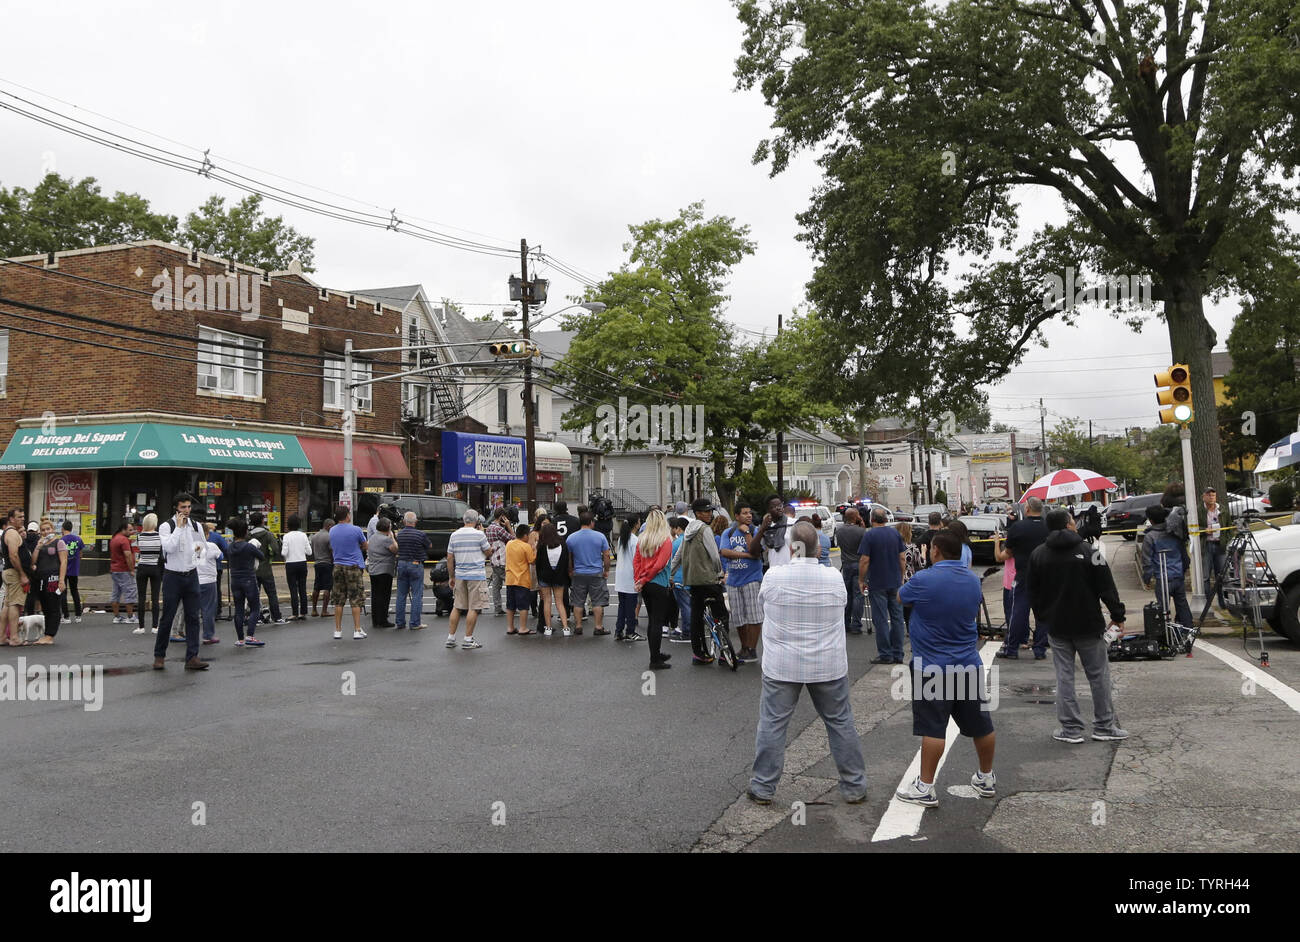 Spectators, Media, FBI investigators and police gather outside First American Fried Chicken after Ahmad Khan Rahami, the man responsible for the New York and New Jersey bombings, was apprehended by police on September 19, 2016 in Elizabeth, New Jersey. Two days before, an explosion from a bomb went off on West 23rd Street in Manhattan around 8:30 p.m. on Saturday, injuring 29 people on West 23rd Street in Manhattan. The man responsible for the explosion in Manhattan on Saturday night and an earlier bombing in New Jersey, Ahmad Khan Rahami, was taken into custody on Monday after he was wounded Stock Photo